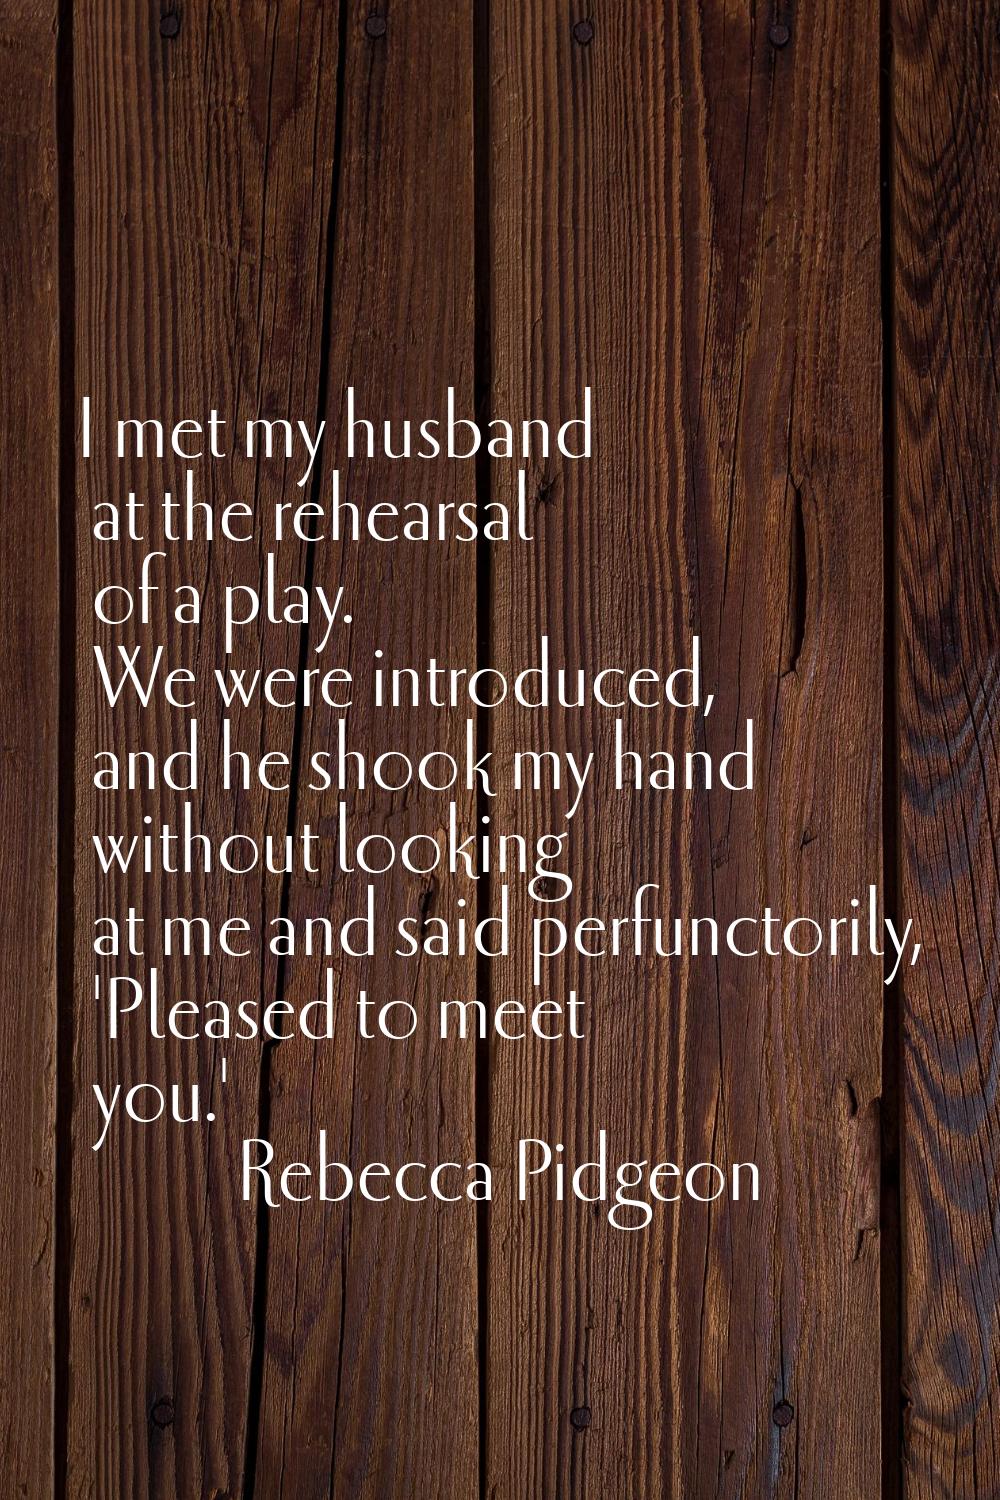 I met my husband at the rehearsal of a play. We were introduced, and he shook my hand without looki